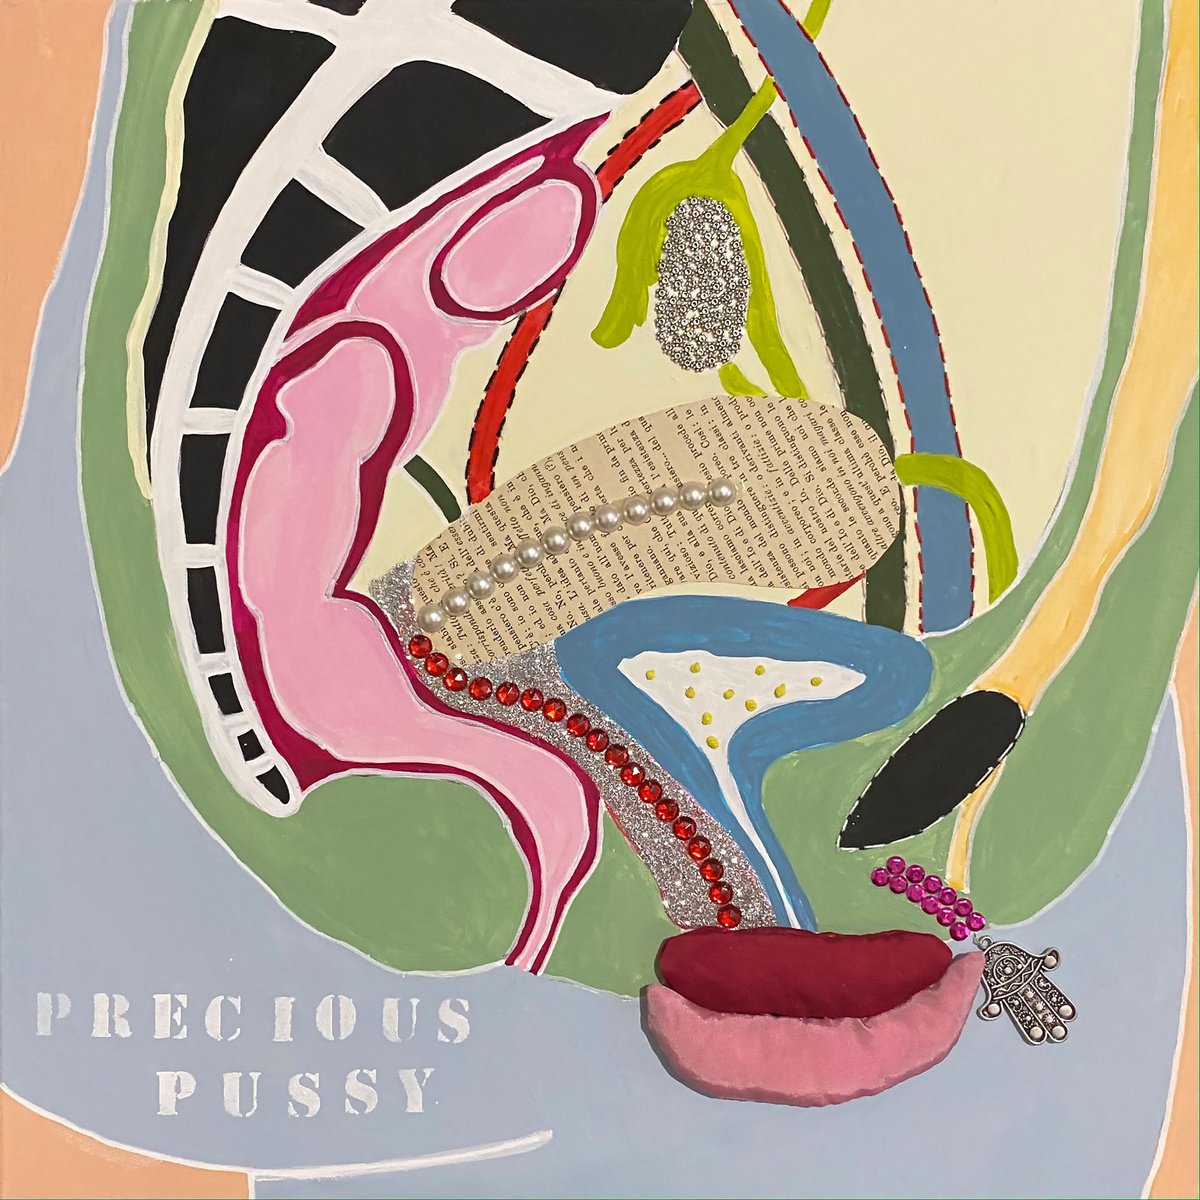 precious pussy by Laura Corre